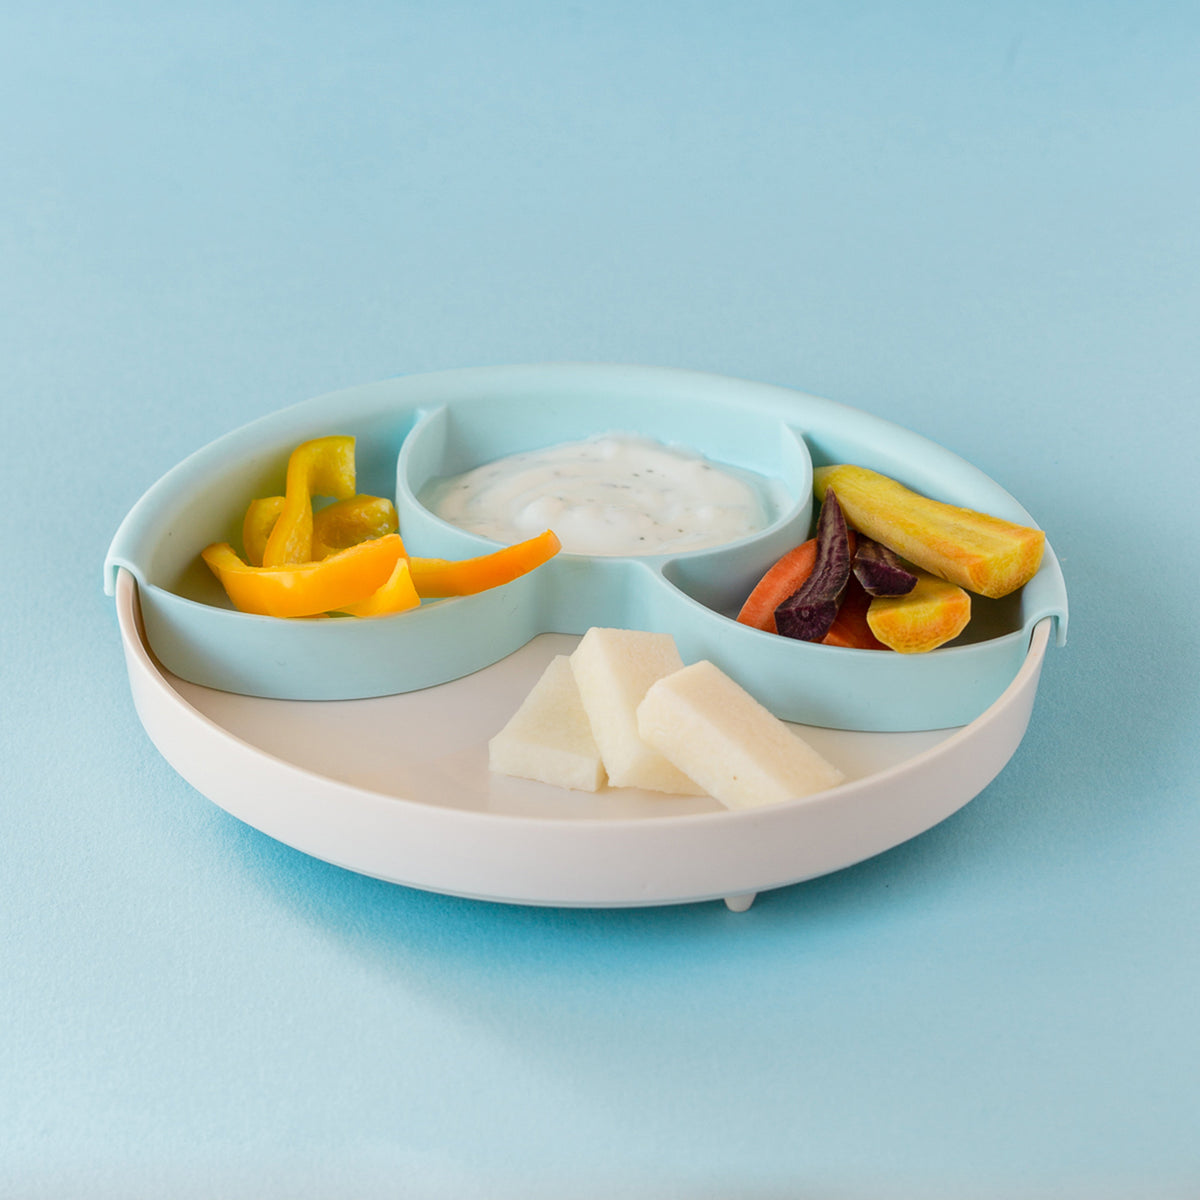 miniware-healthy-meal-set-pla-smart-divider-suction-plate-in-vanilla-silicone-divider-in-aqua- (3)